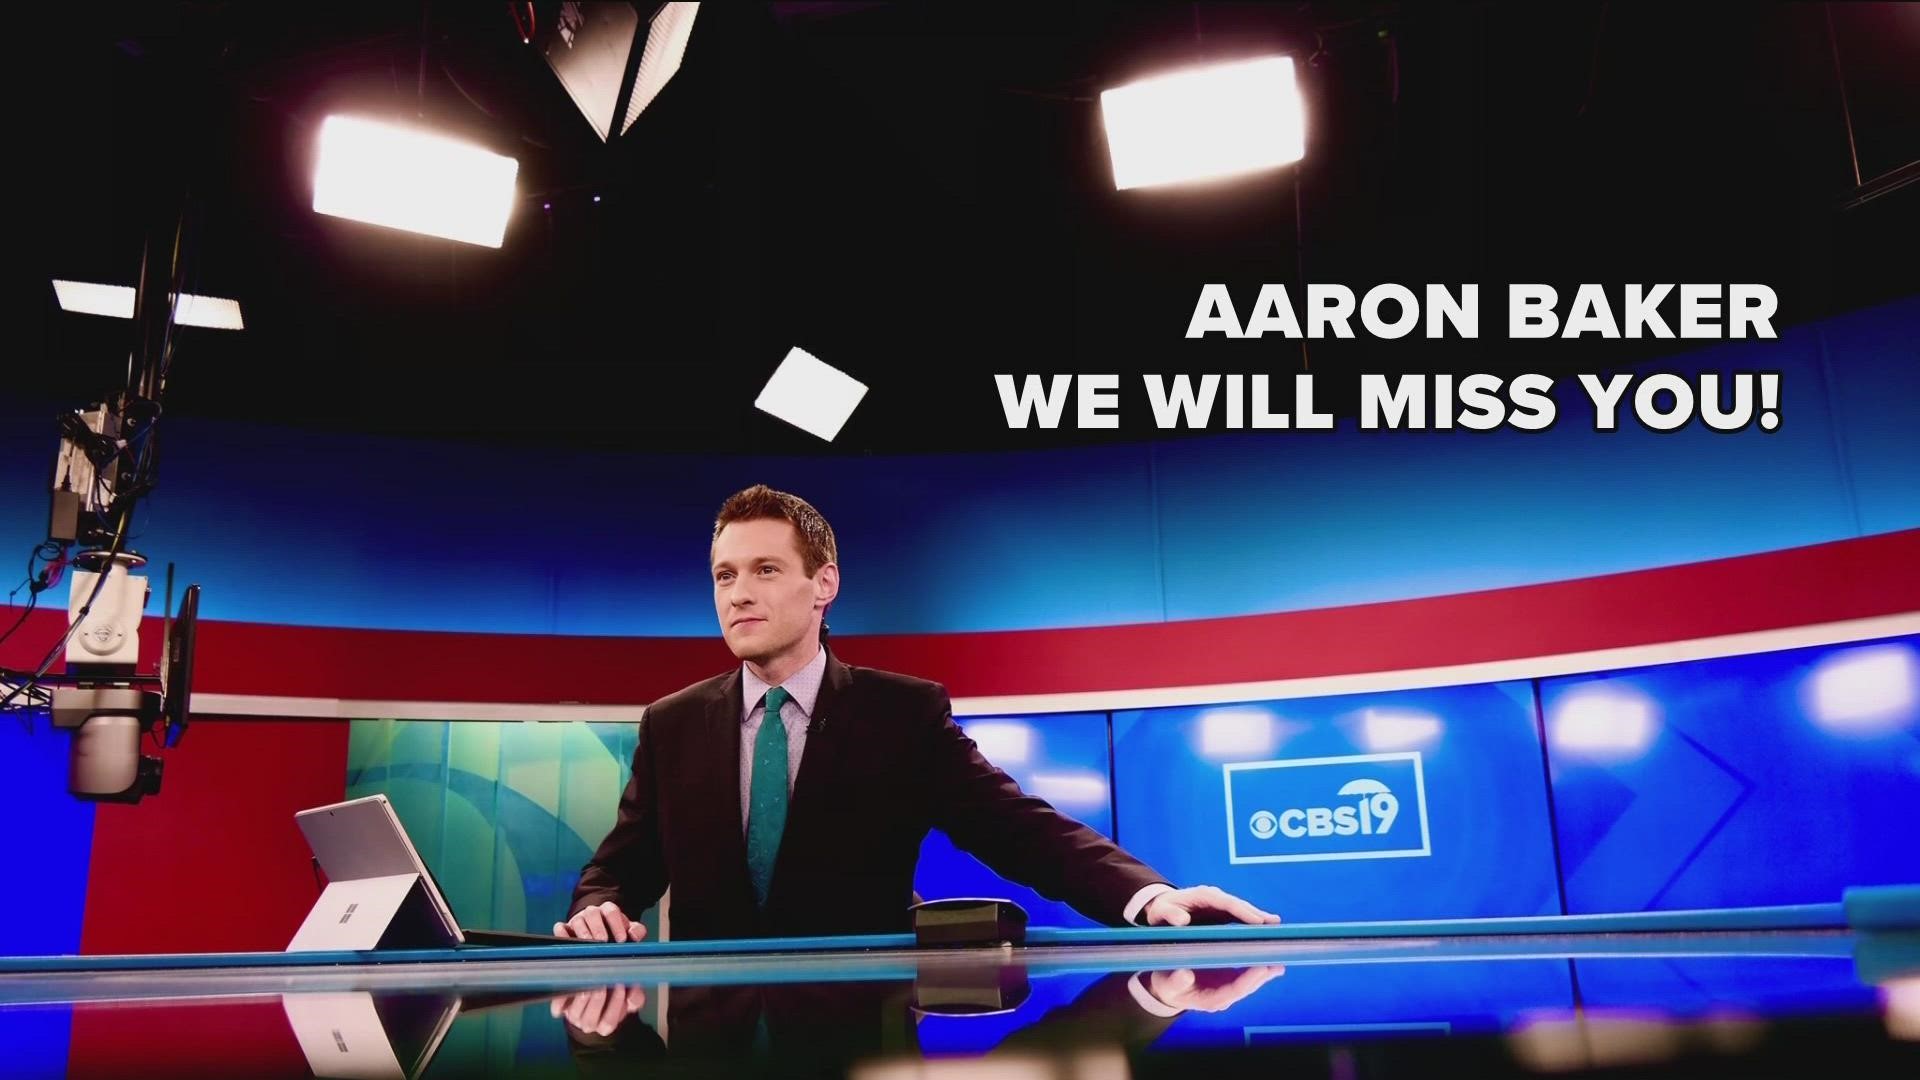 CBS19 says farewell to our night anchor, Aaron Baker.